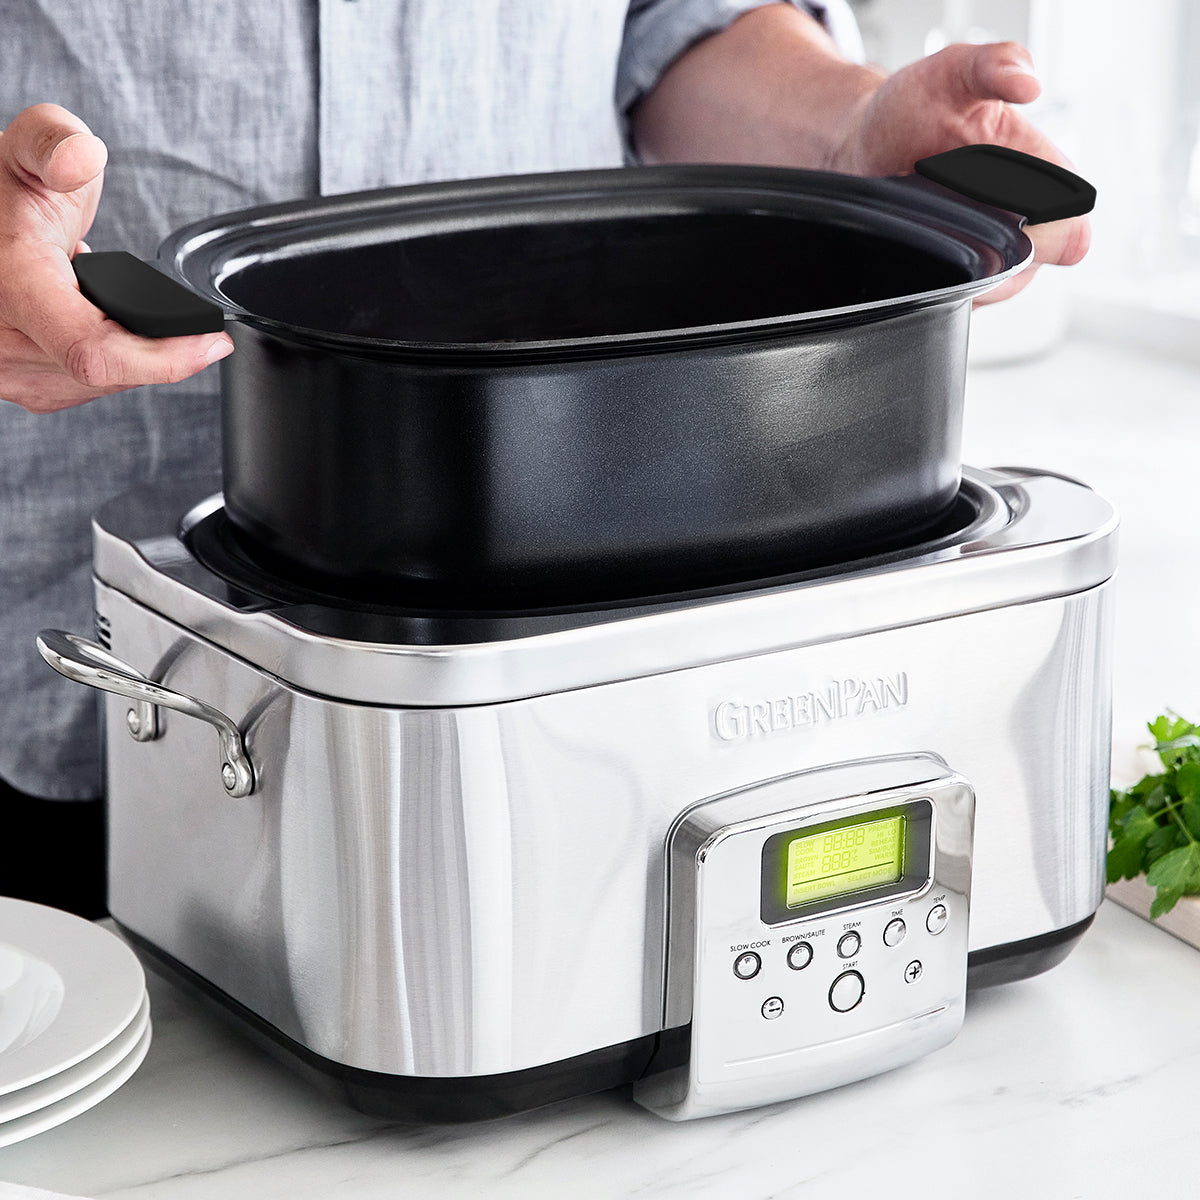 non toxic slow cooker from GreenPan, shown on a kitchen counter with someone lifting the inner compartment partially out of the cooker